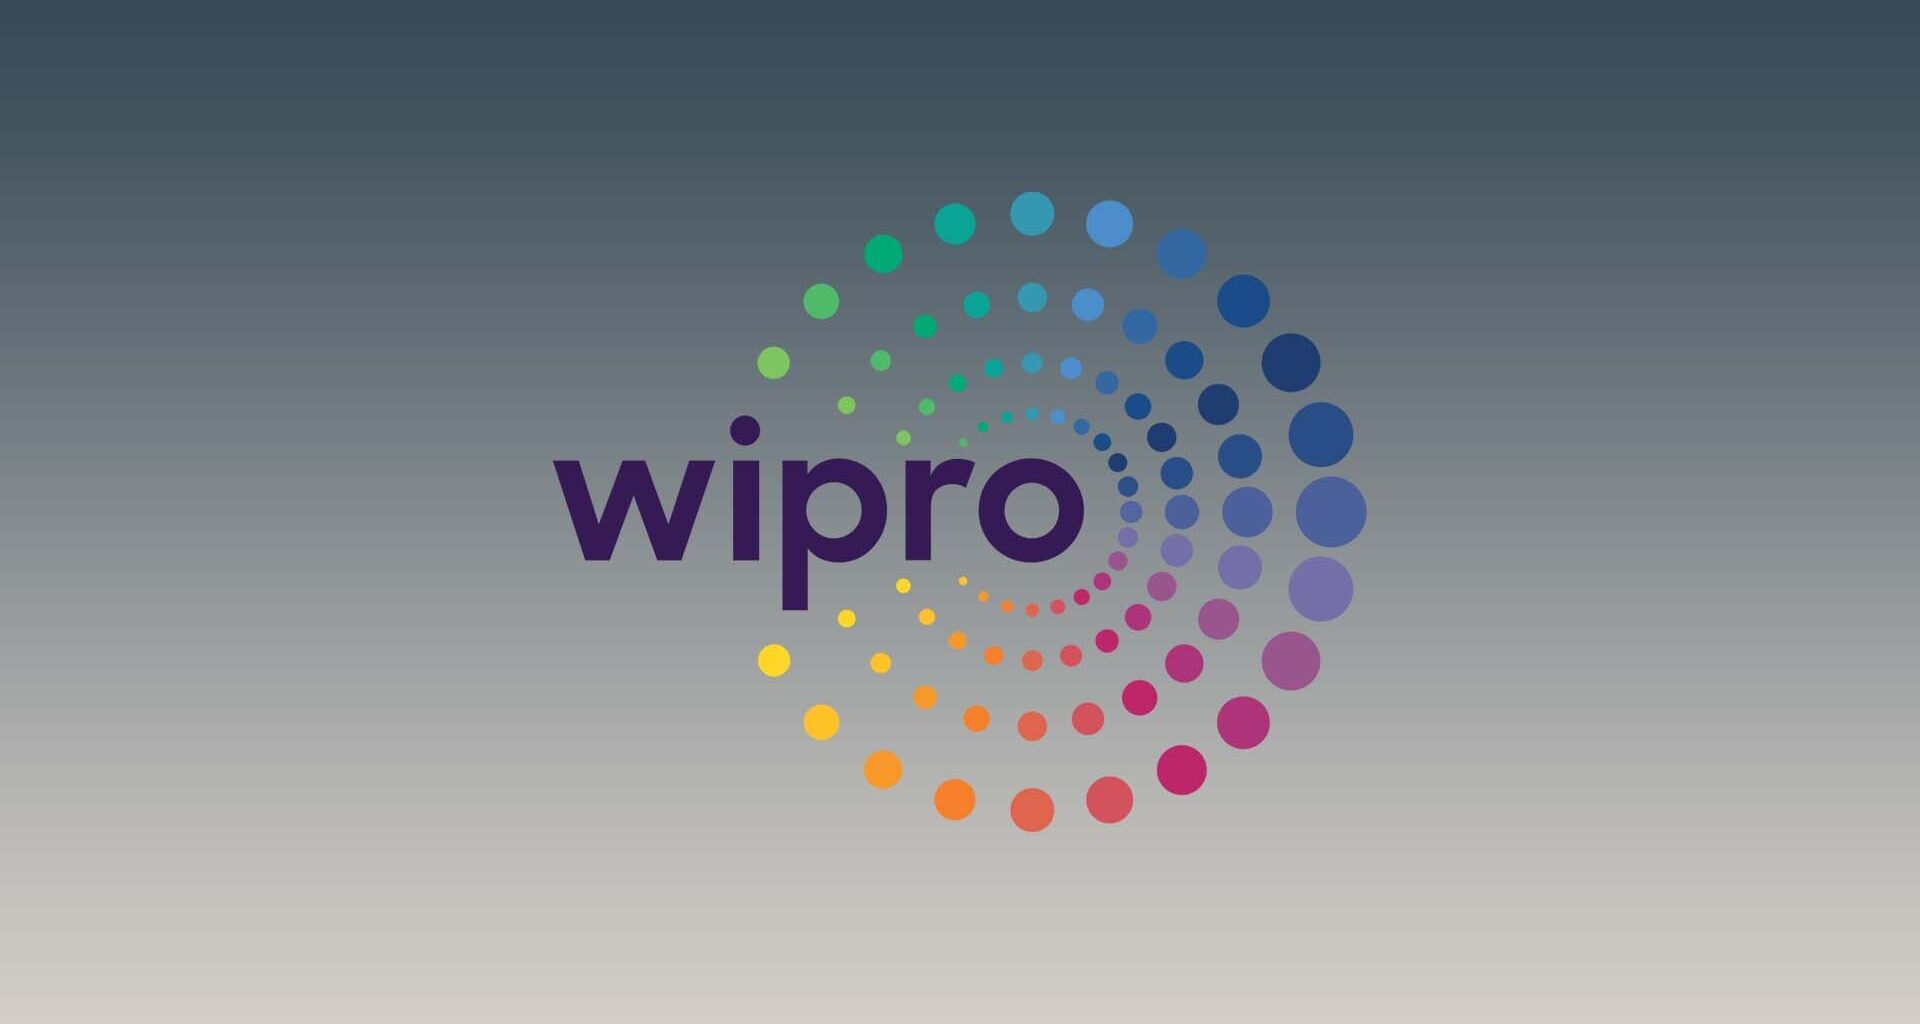 Wipro's Exceptional Brand Values